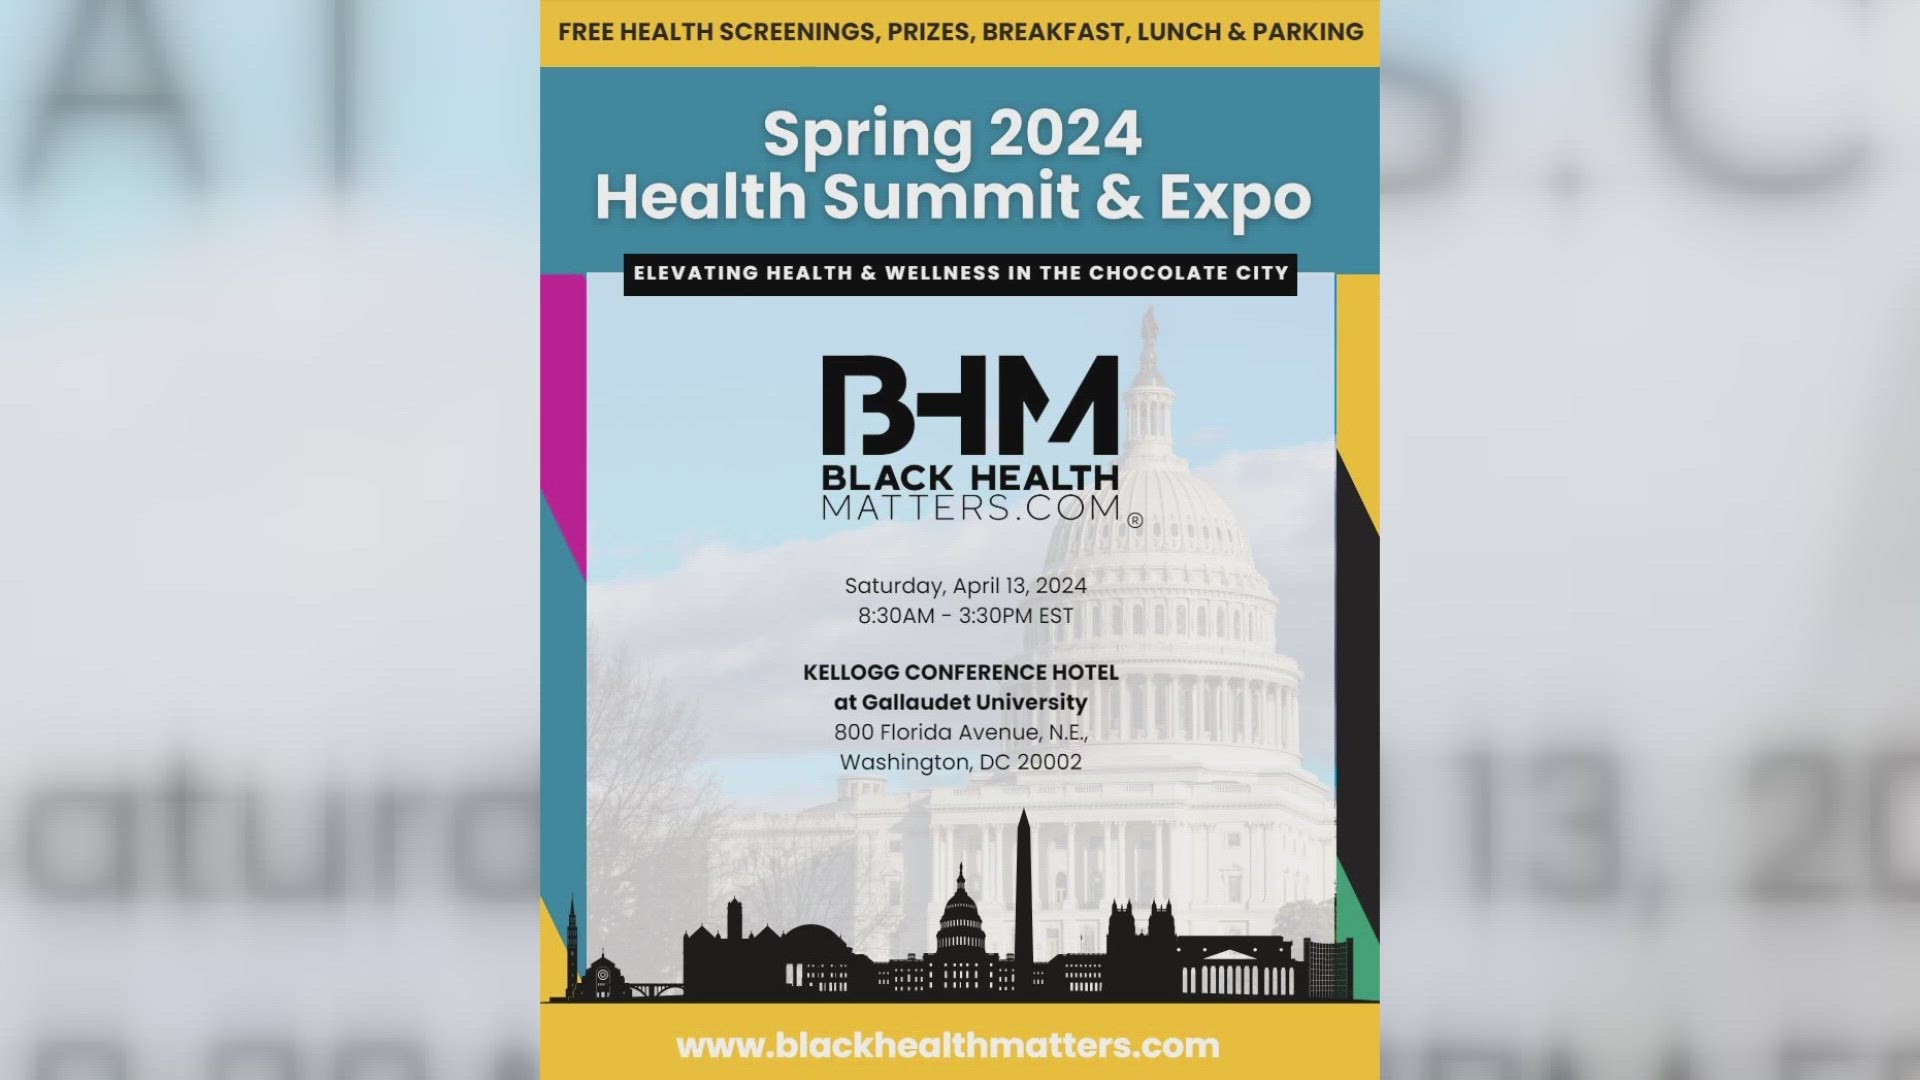 WUSA9 spoke with Roslyn Young-Daniels, founder and CEO of Black Health Matters, about the importance of this event.